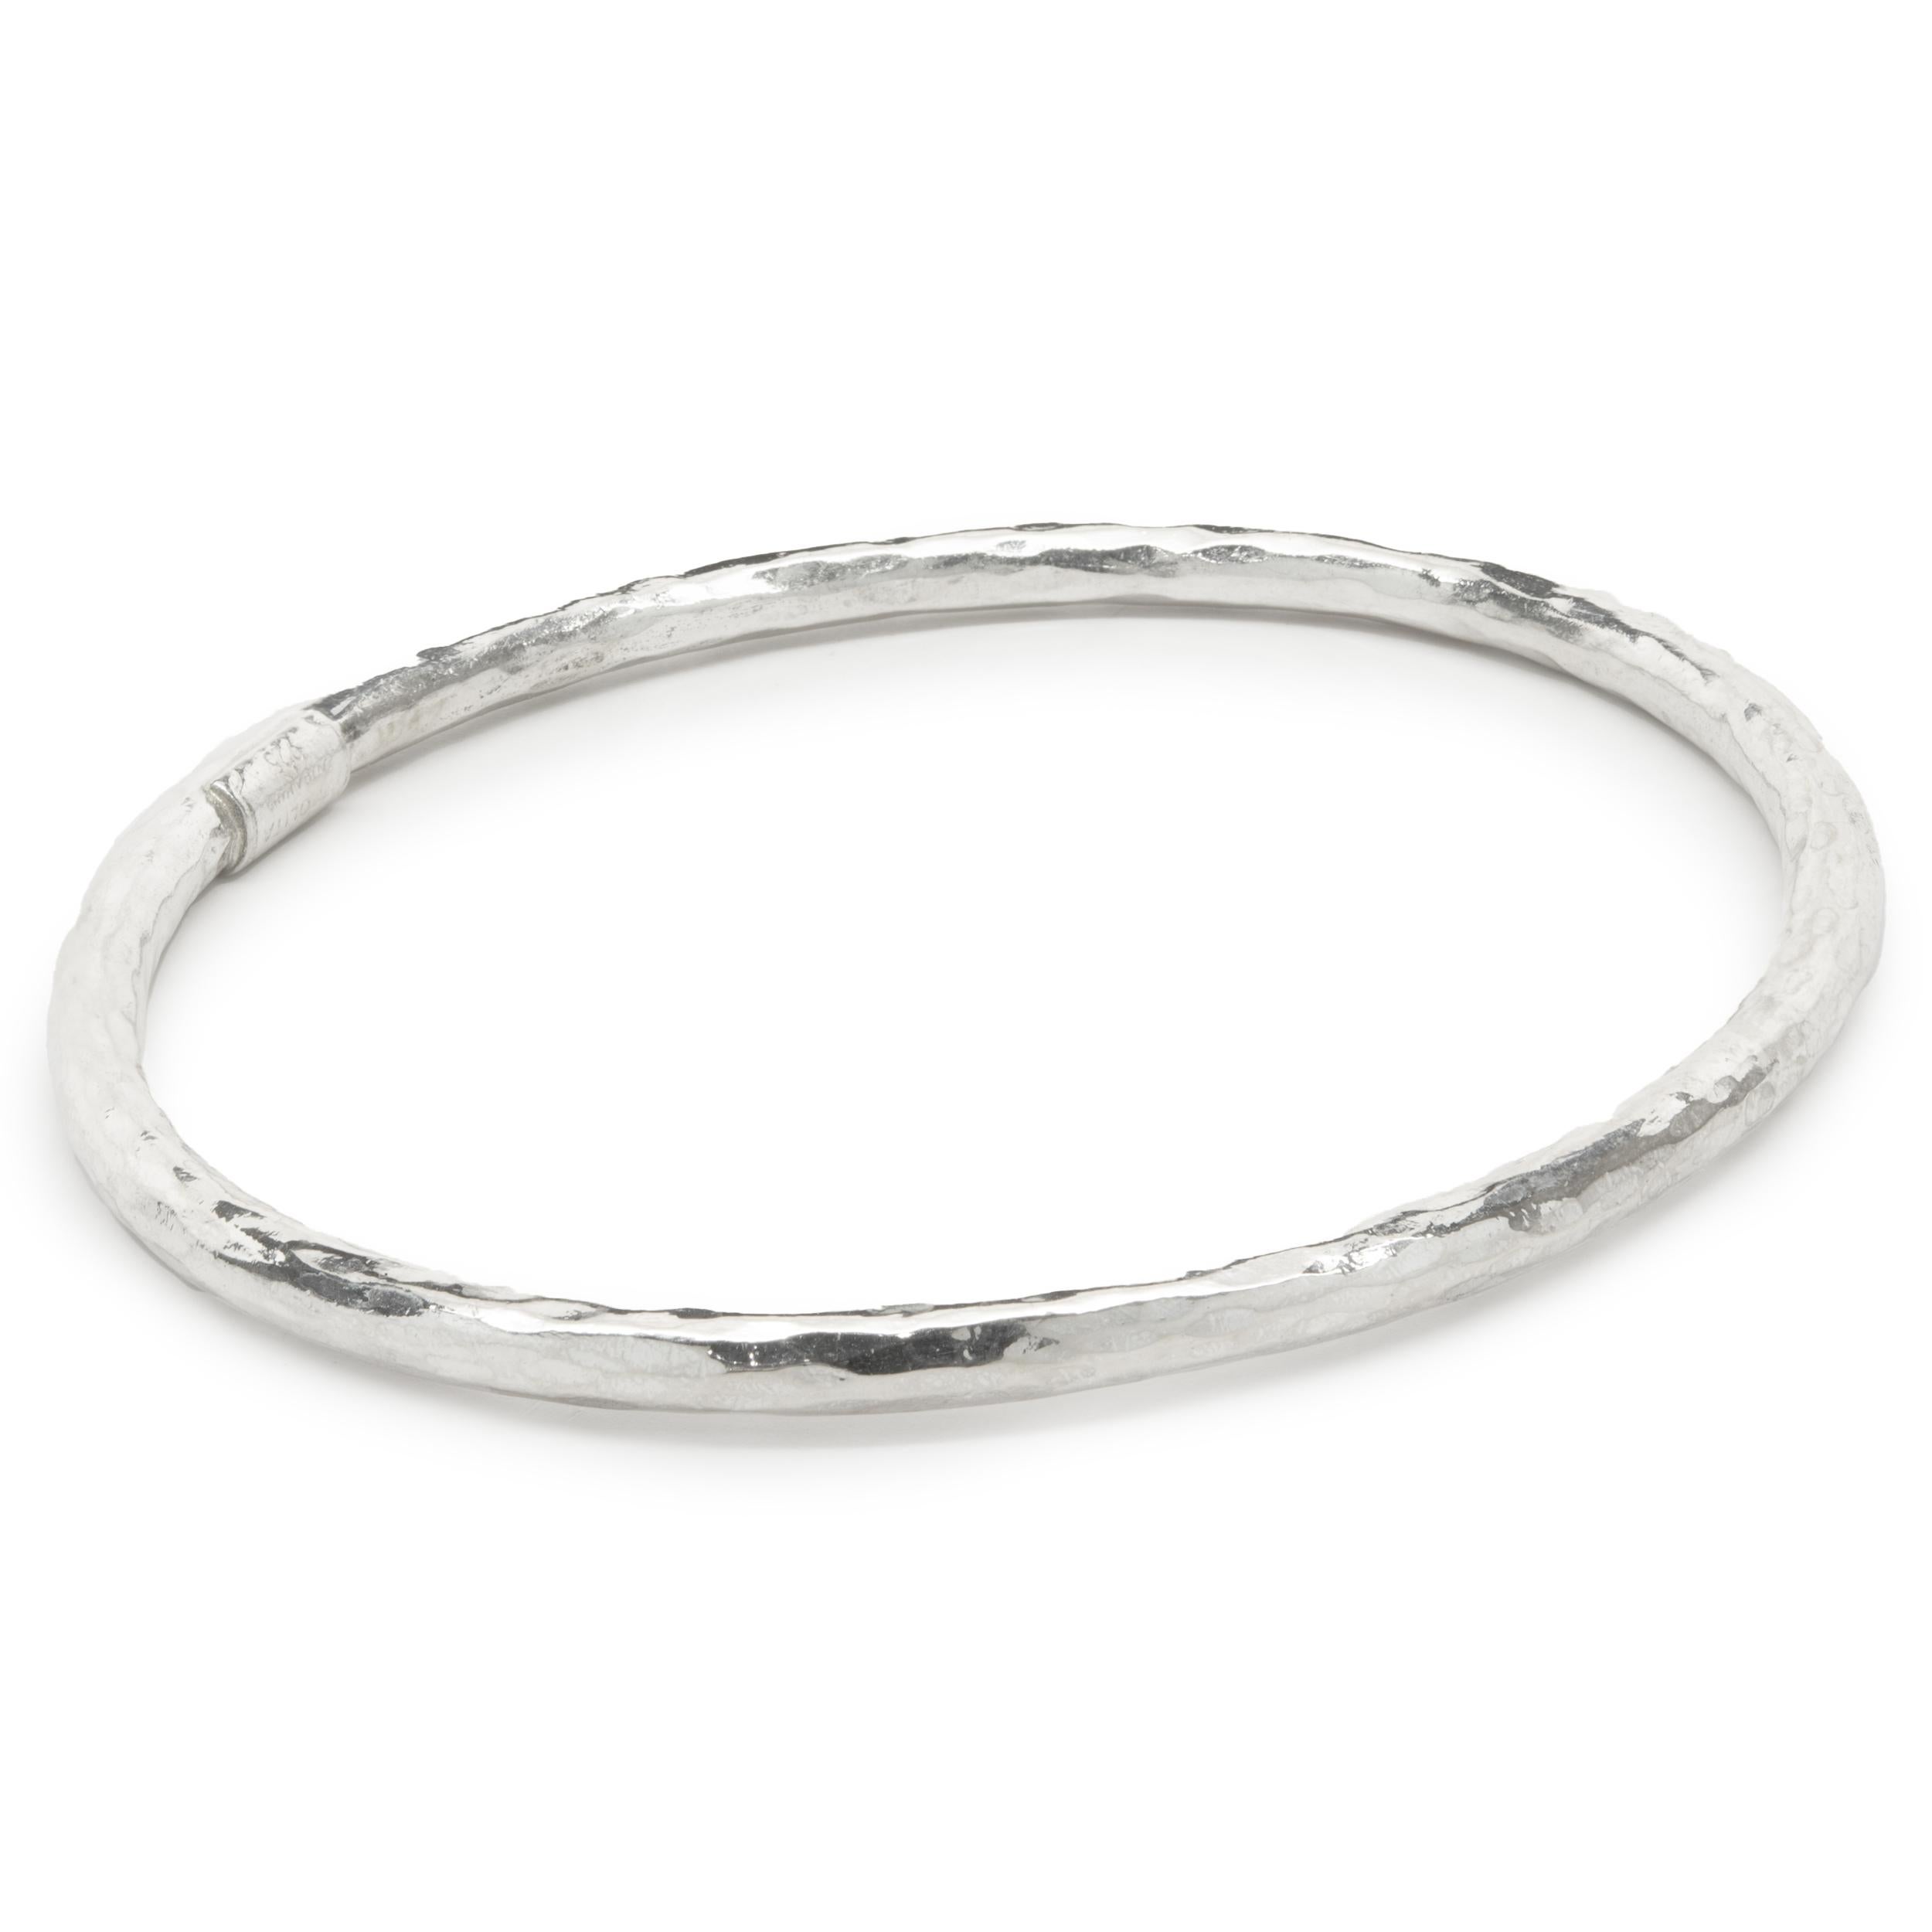 Designer: Ippolita
Material: sterling silver
Weight: 25.13 grams
Dimensions: bracelet will fit up to a 7-inch wrist